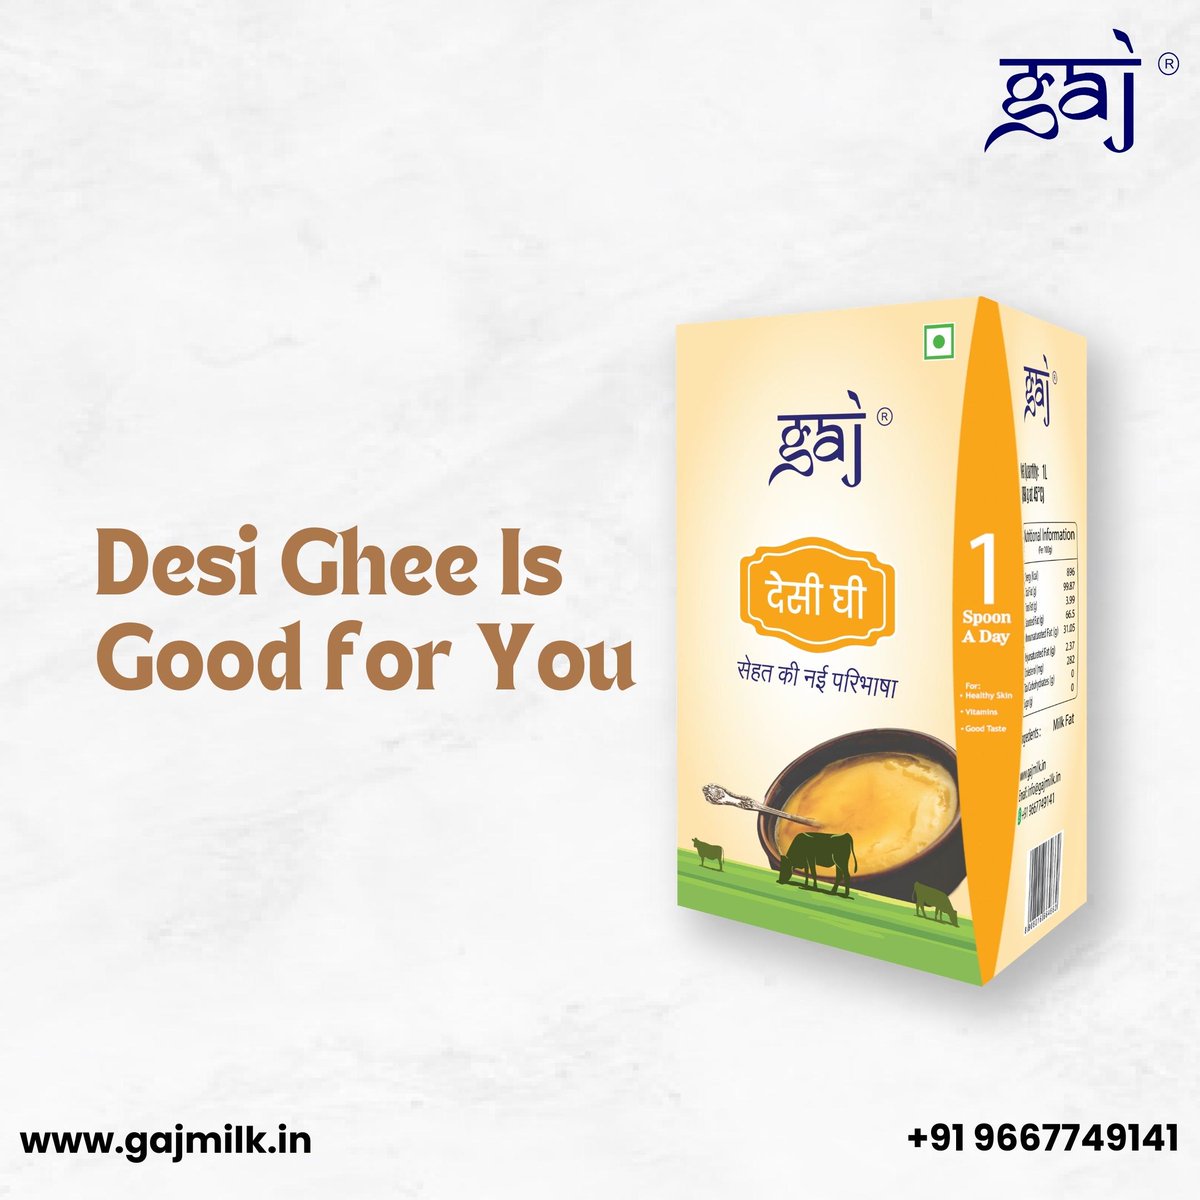 Elevate your culinary creations with the rich, golden goodness of Gaj Desi Ghee. Pure flavor, pure indulgence! 🌼🥄 

#GajDesiGhee #DesiGhee #PureGhee #PureIndulgence #GoldenGoodness #GheeLove #CookingWithGaj #NourishWithGaj #DairyDelights #HealthyLiving #DairyProducts #Gaj